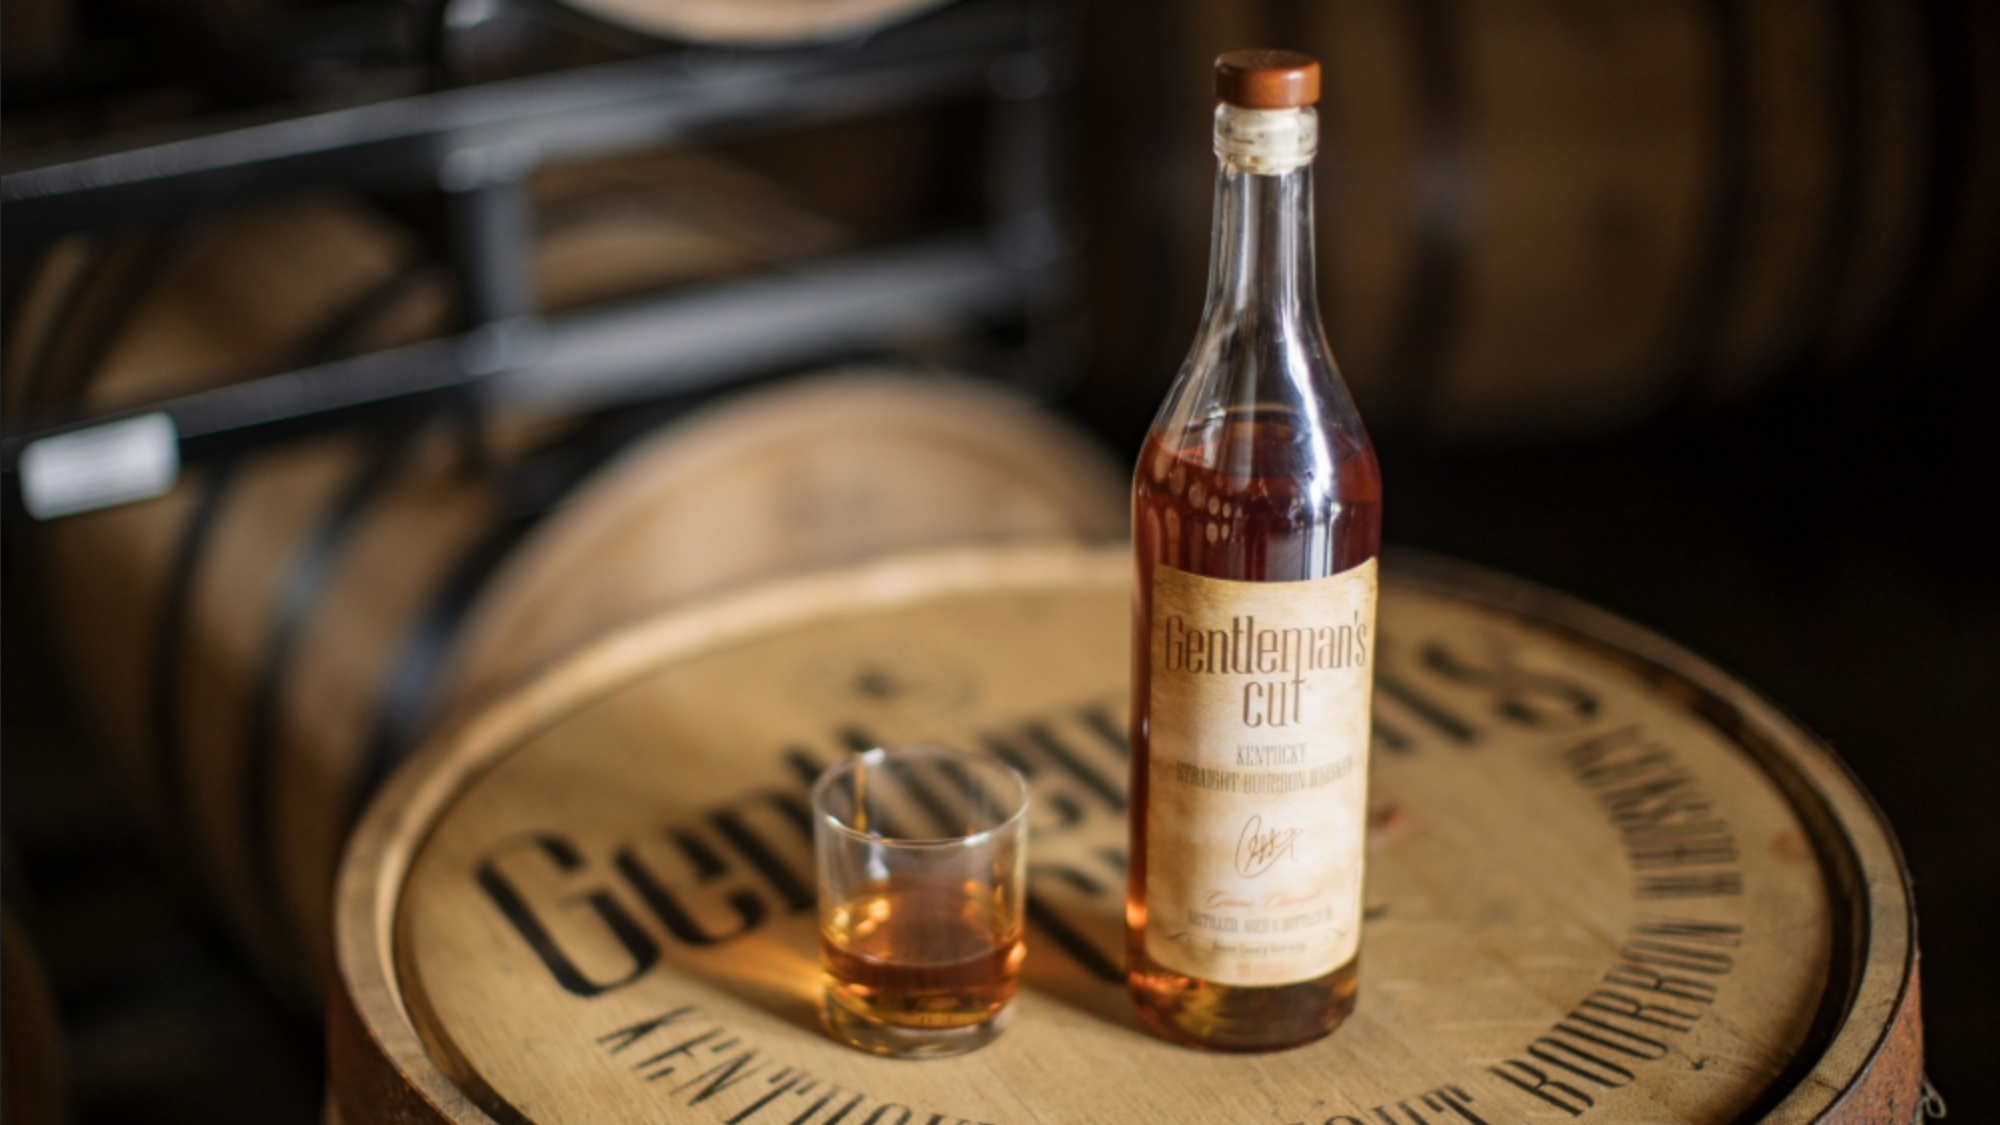 Steph Curry Shoots Into Whiskey With Gentleman’s Cut Bourbon